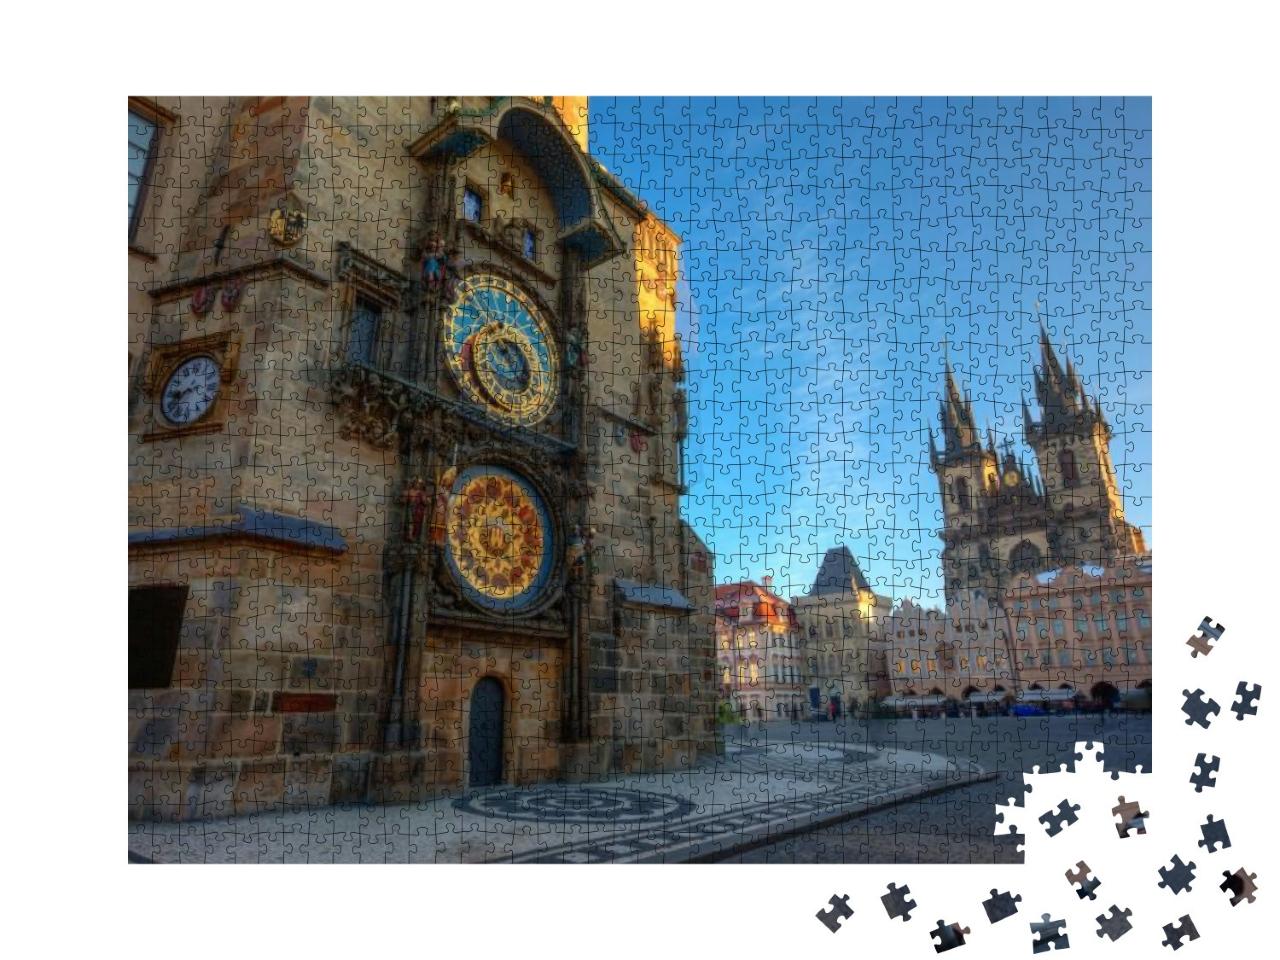 Prague Old Town Square, Sunrise At Astronomical Clock Tow... Jigsaw Puzzle with 1000 pieces